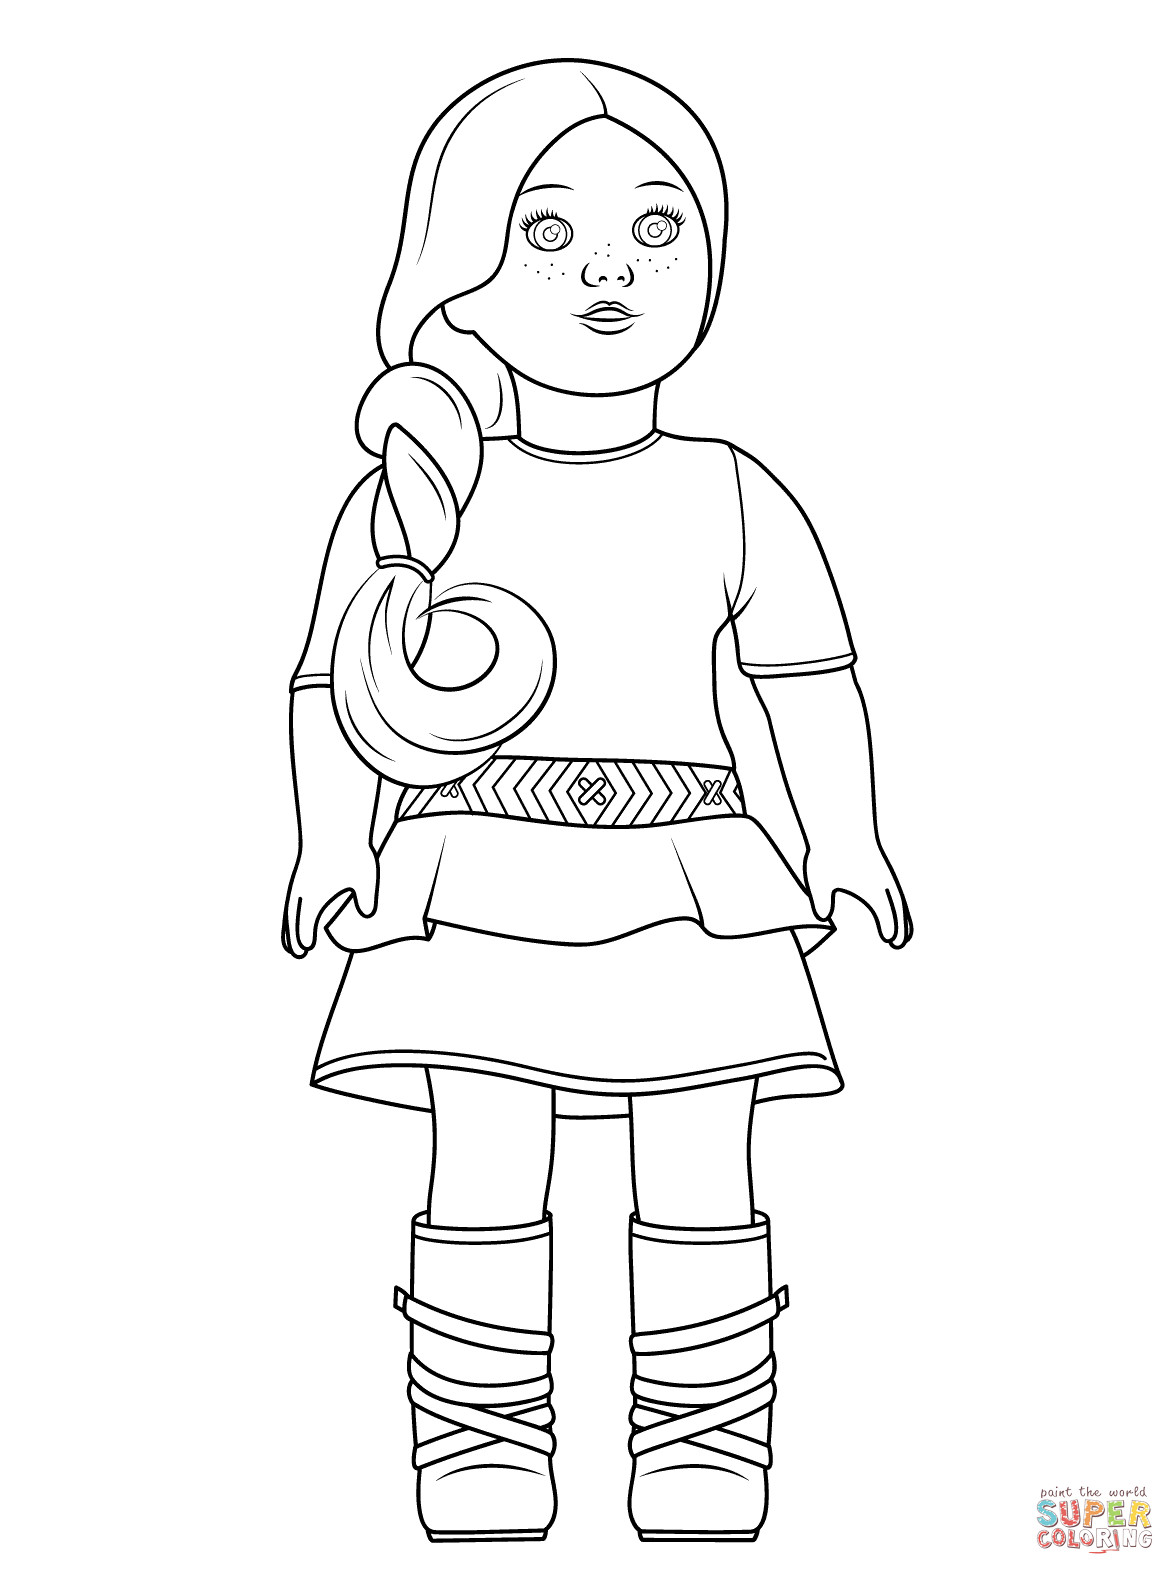 American Girl Coloring Pages Julie
 American Girl Saige coloring page